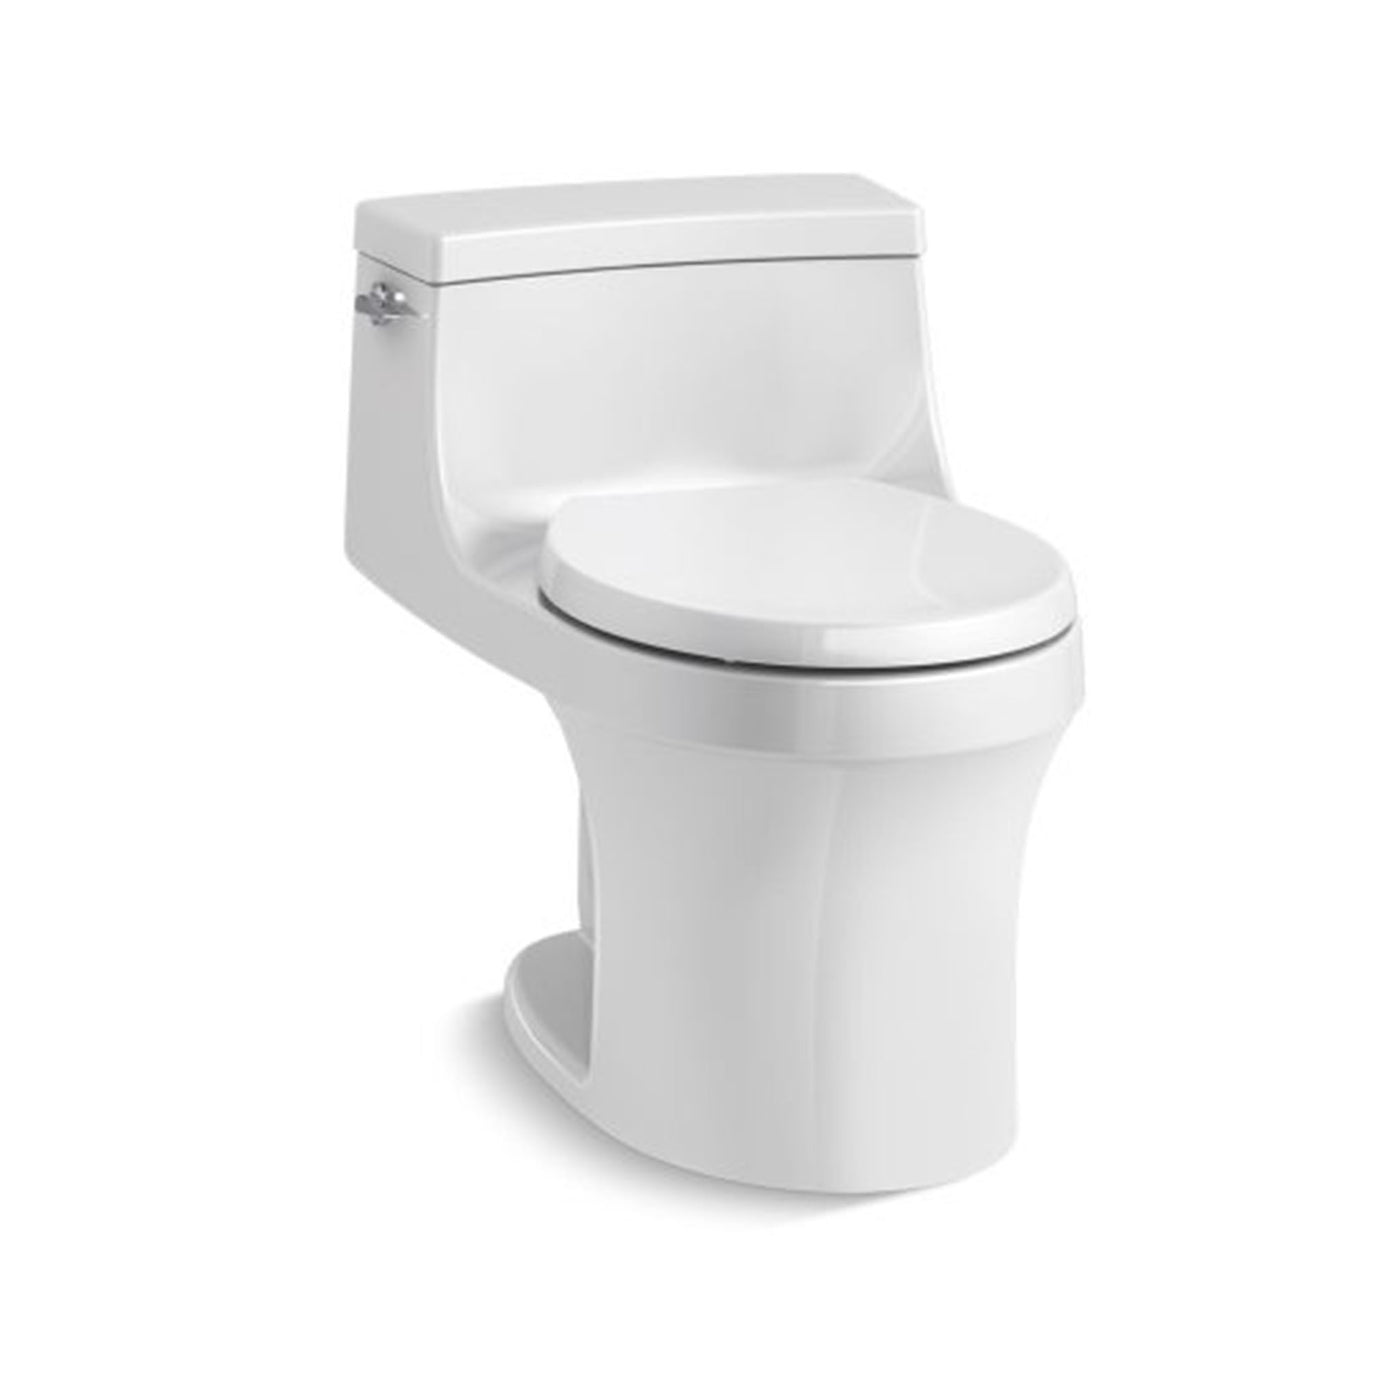 San Souci® One-piece round-front 1.28 gpf toilet with slow-close seat